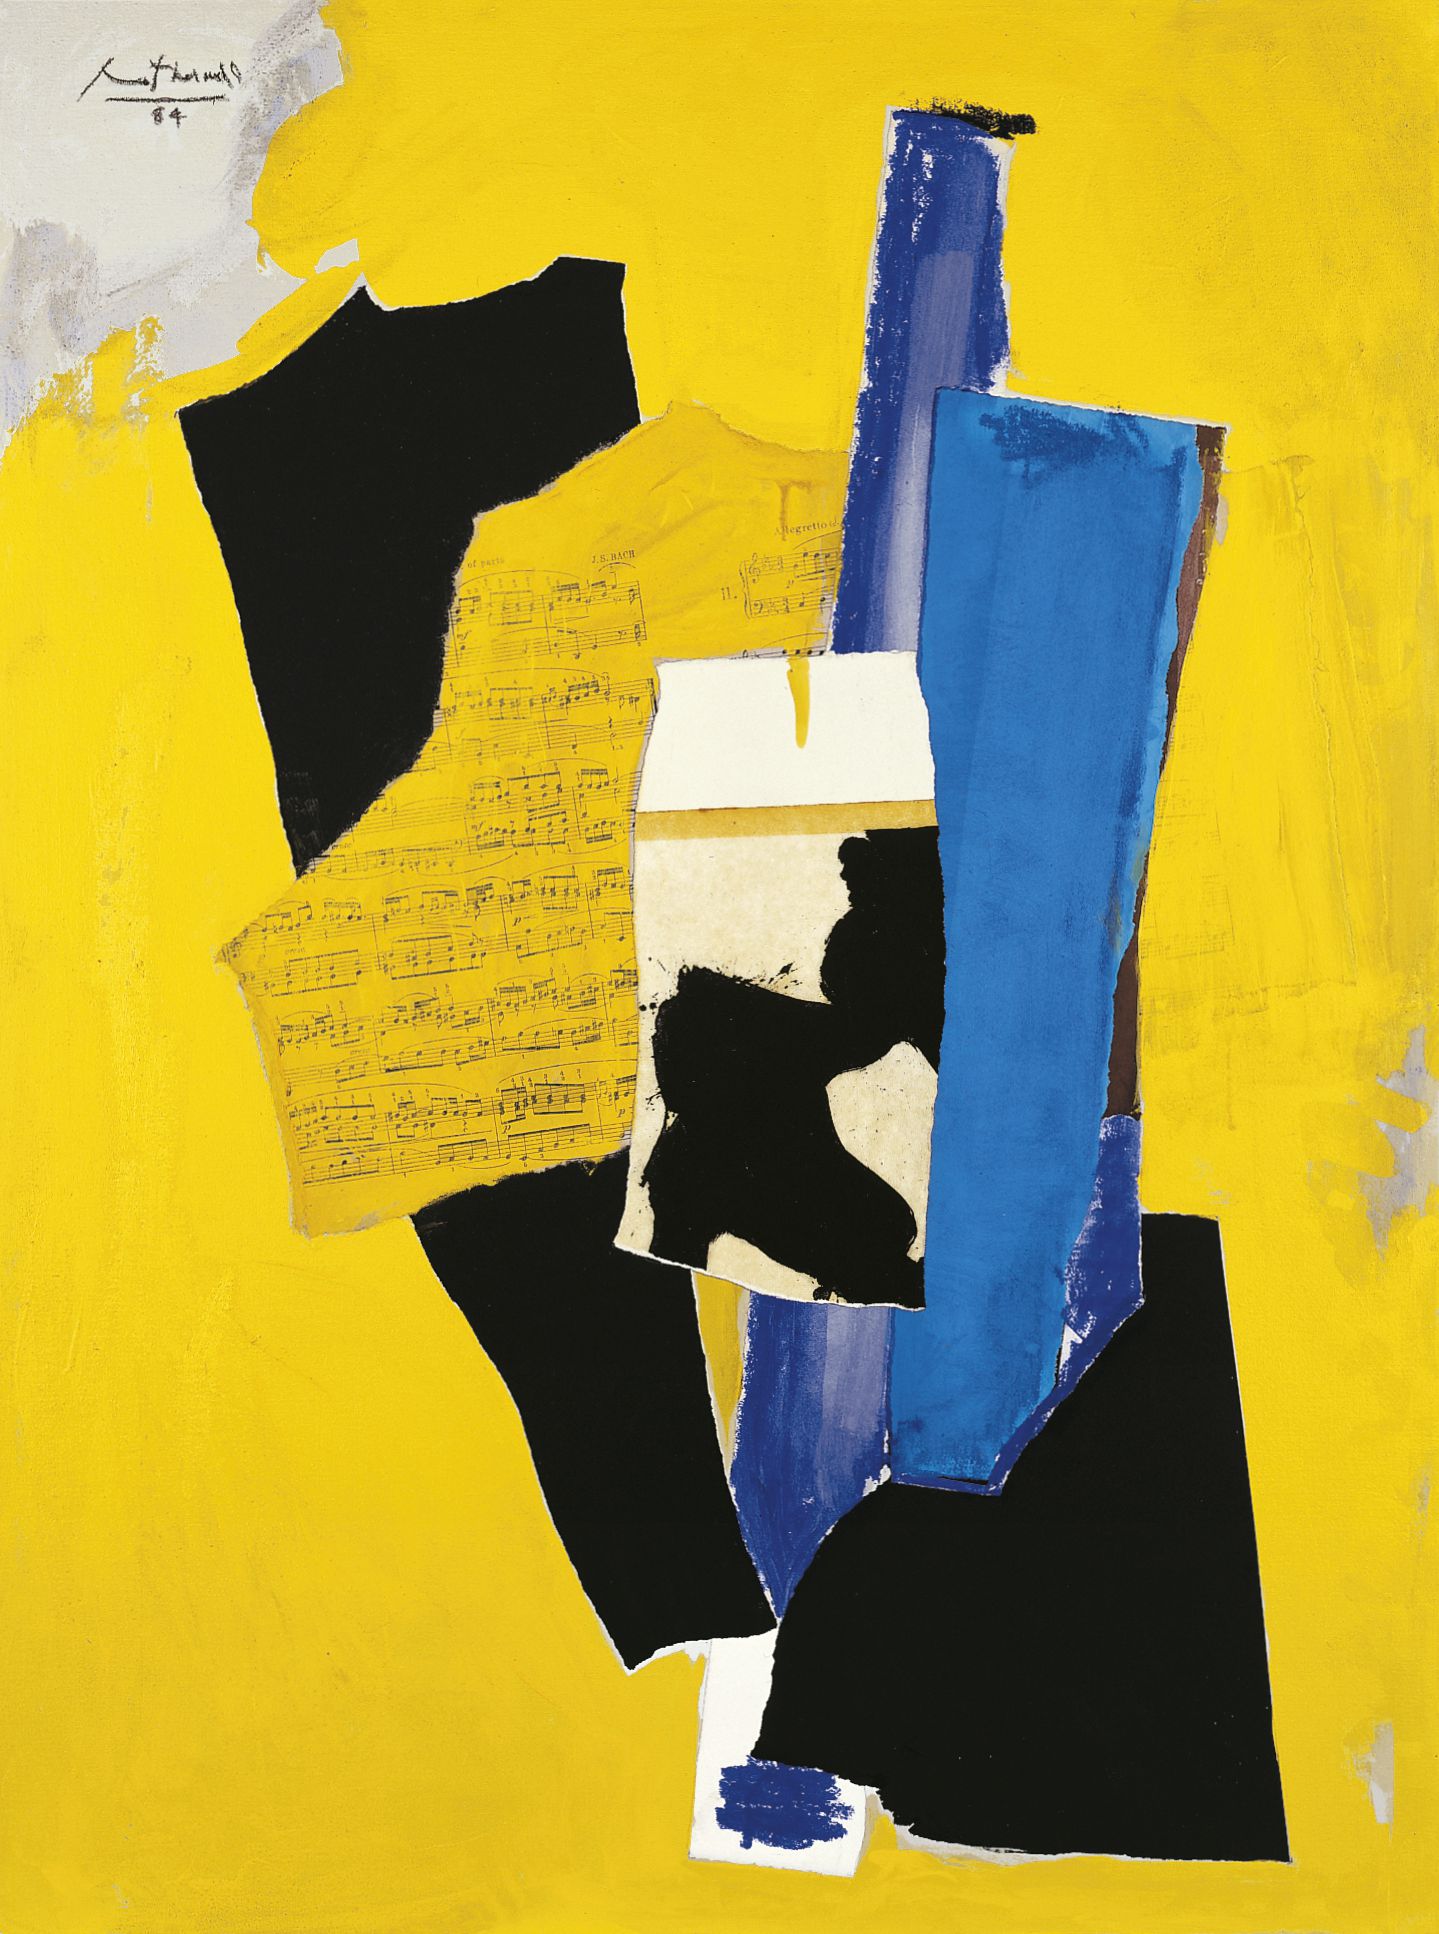 Yellow Music, 1984. Acrylic and pasted papers on board, 40 x 30 inches (101.6 x 76.2 cm)